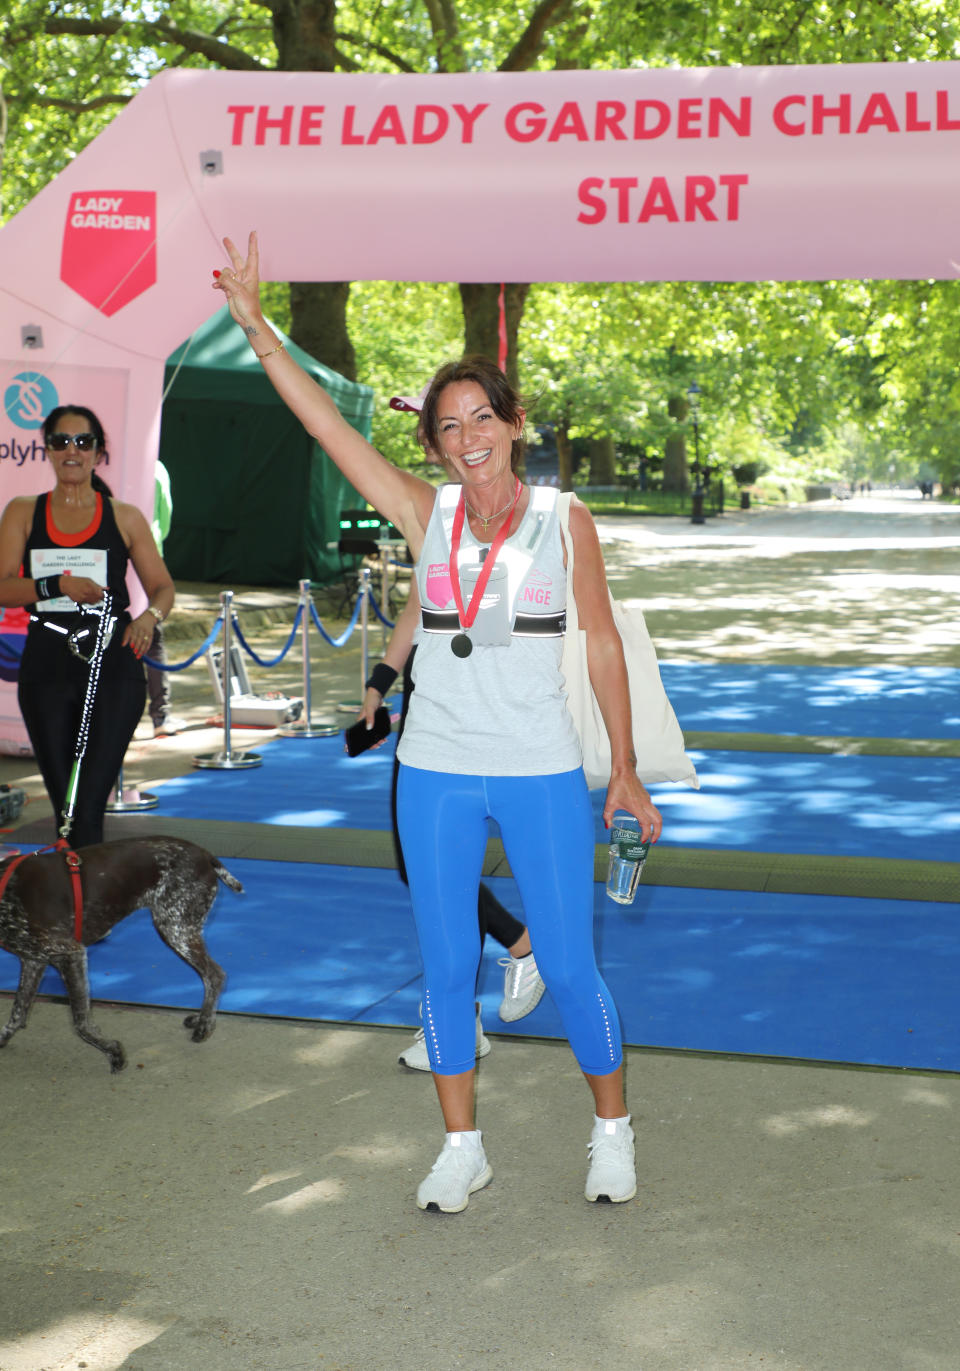 Davina McCall attends the Lady Garden 5K or 10K Challenge in Hyde Park, London, in May, 2022. (Getty Images)